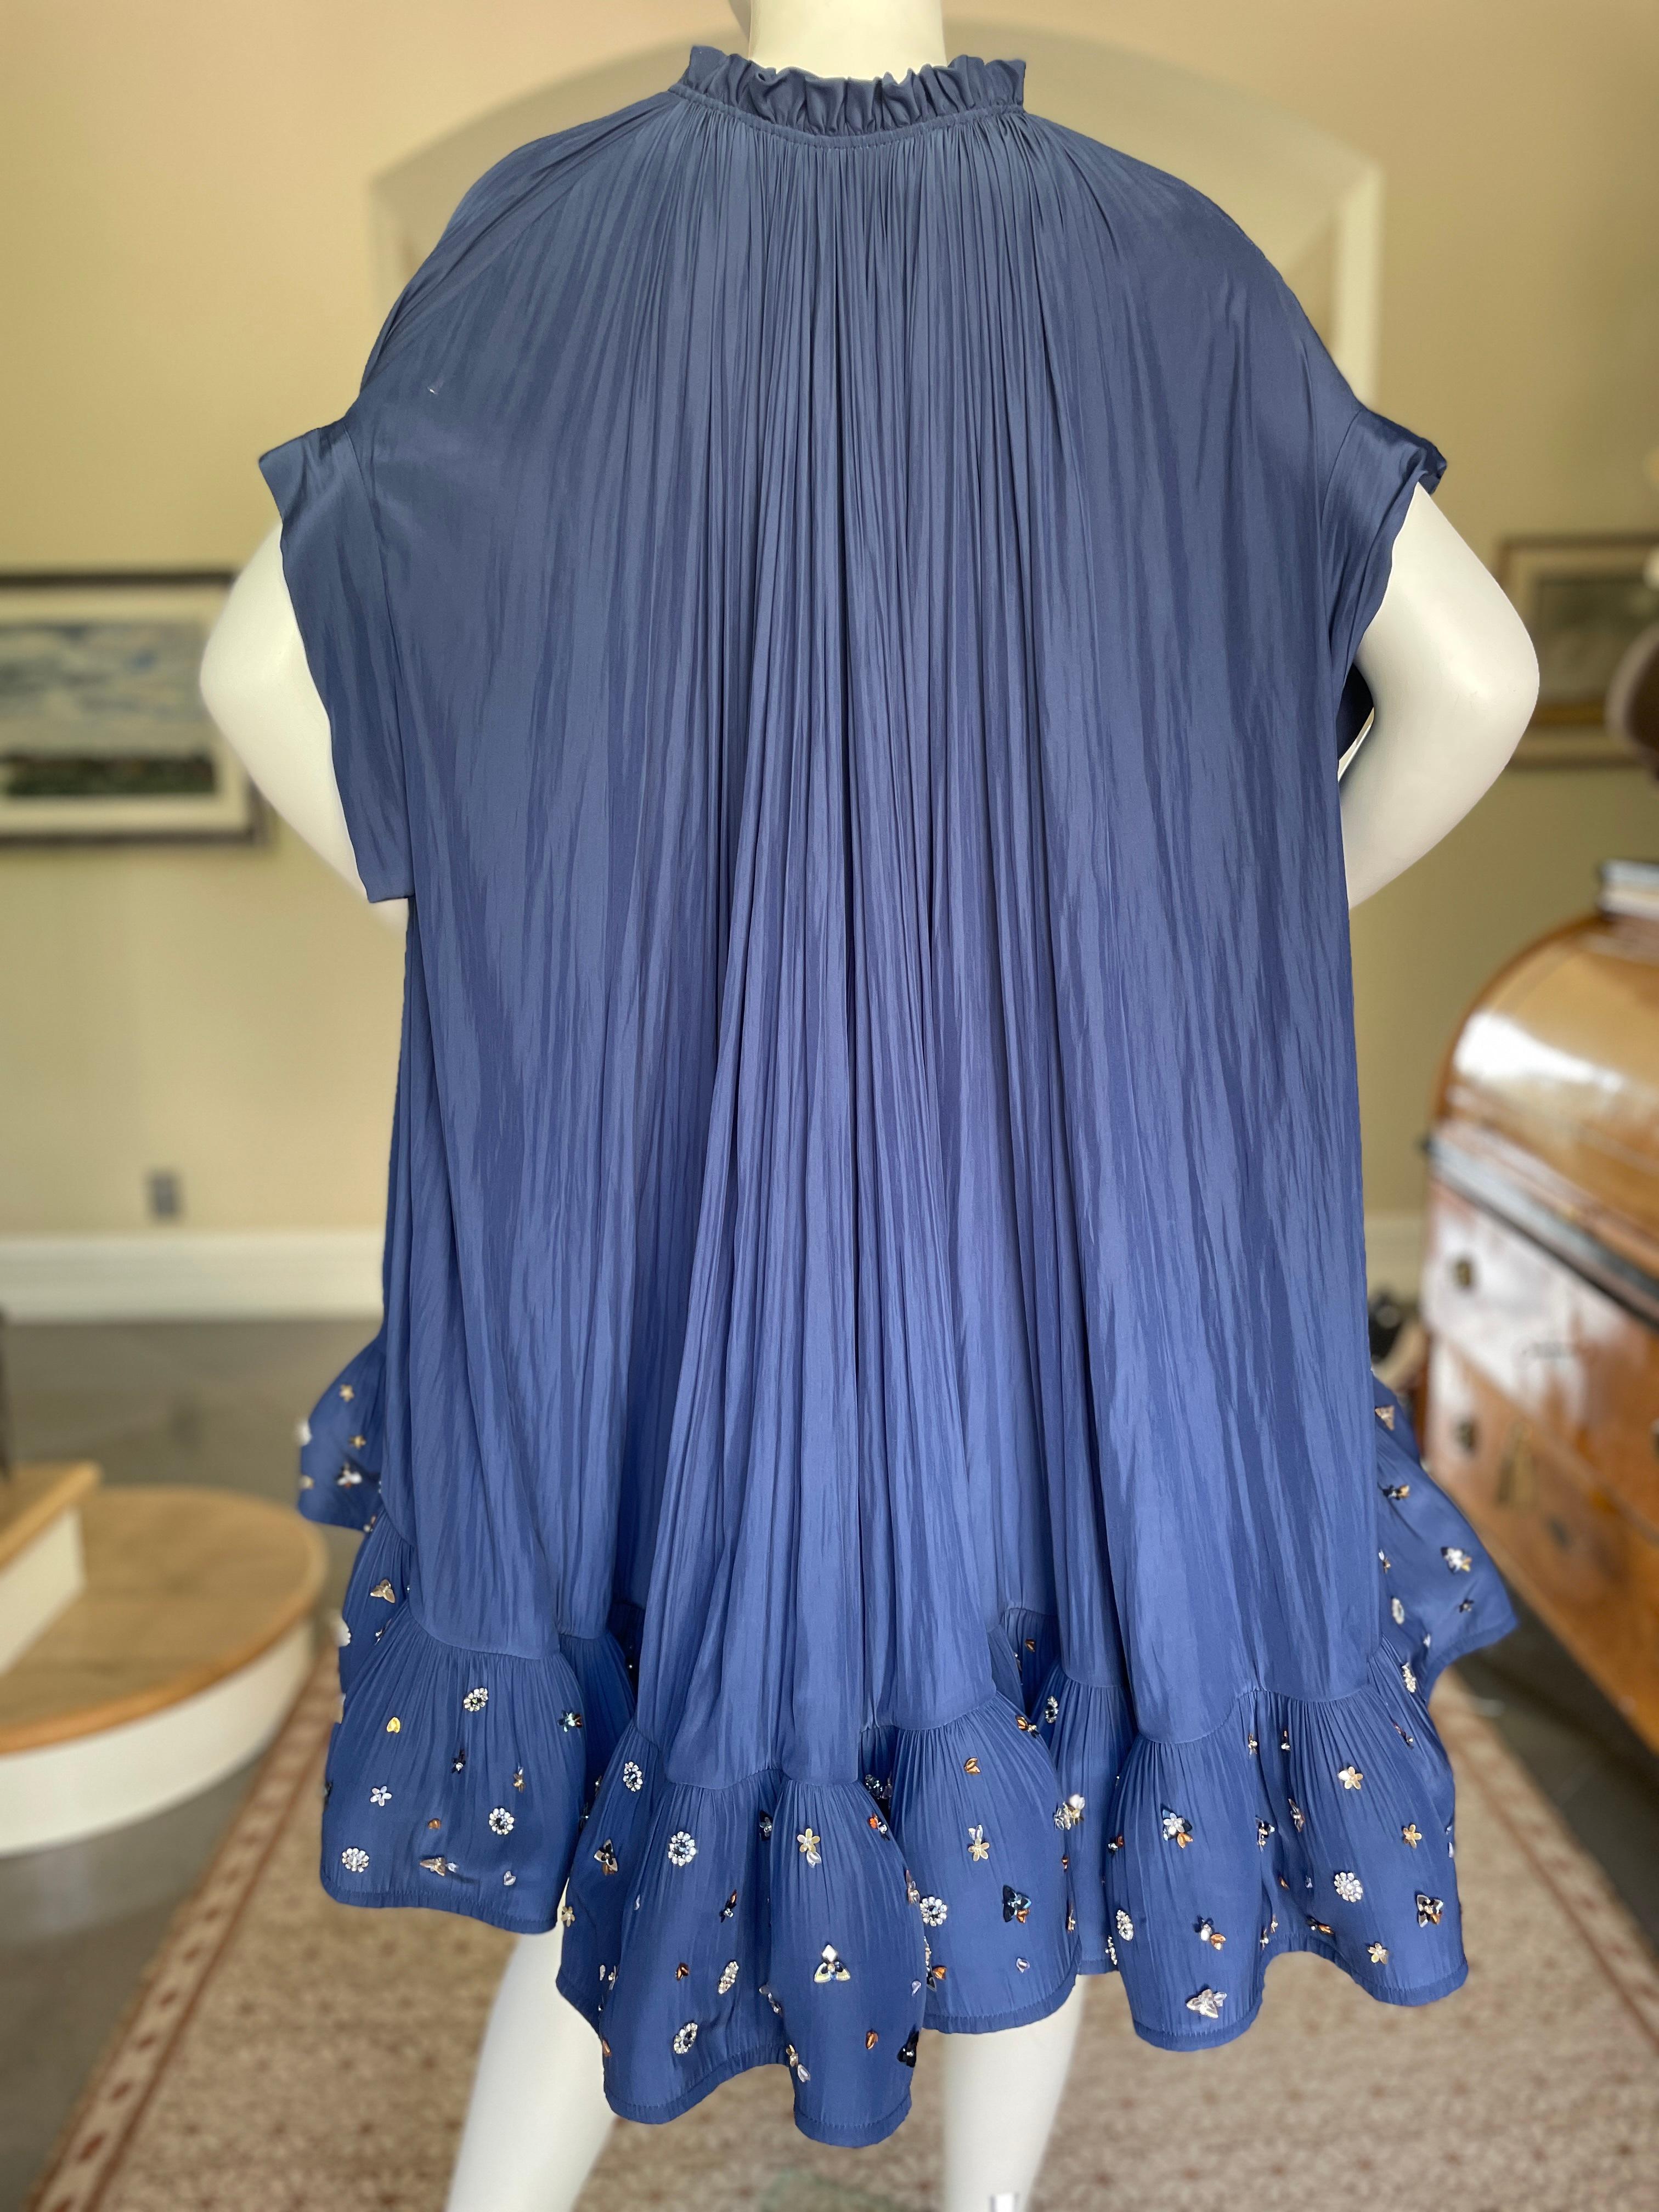 Lanvin by Alber Elbaz Voluminous Navy Blue Pleated Embellished Cocktail Dress  In New Condition For Sale In Cloverdale, CA